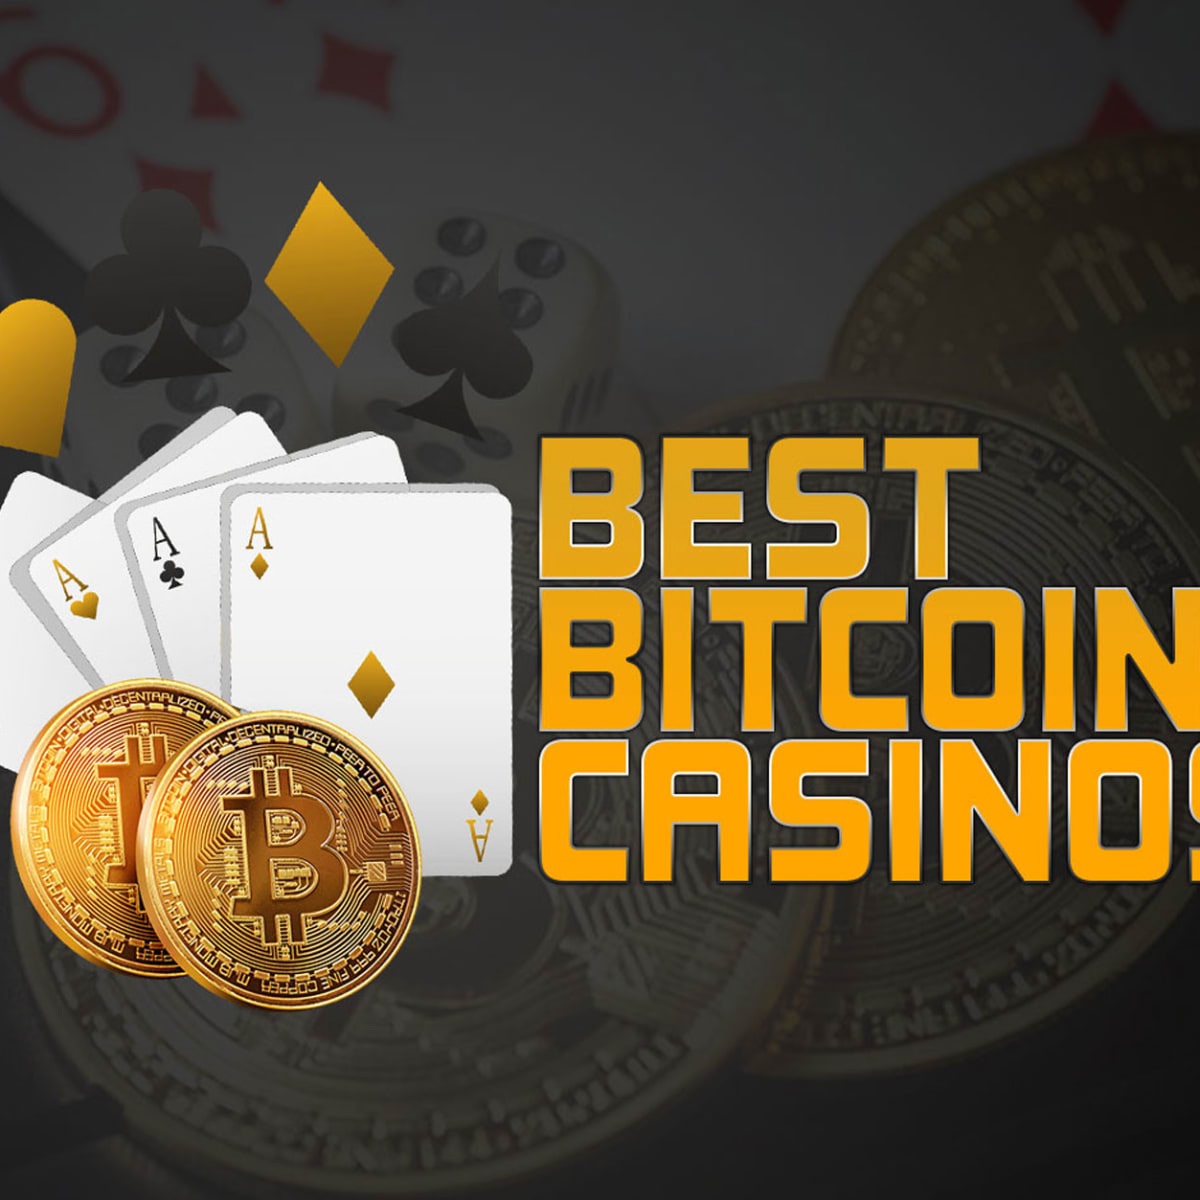 I Don't Want To Spend This Much Time On crypto casino guides. How About You?